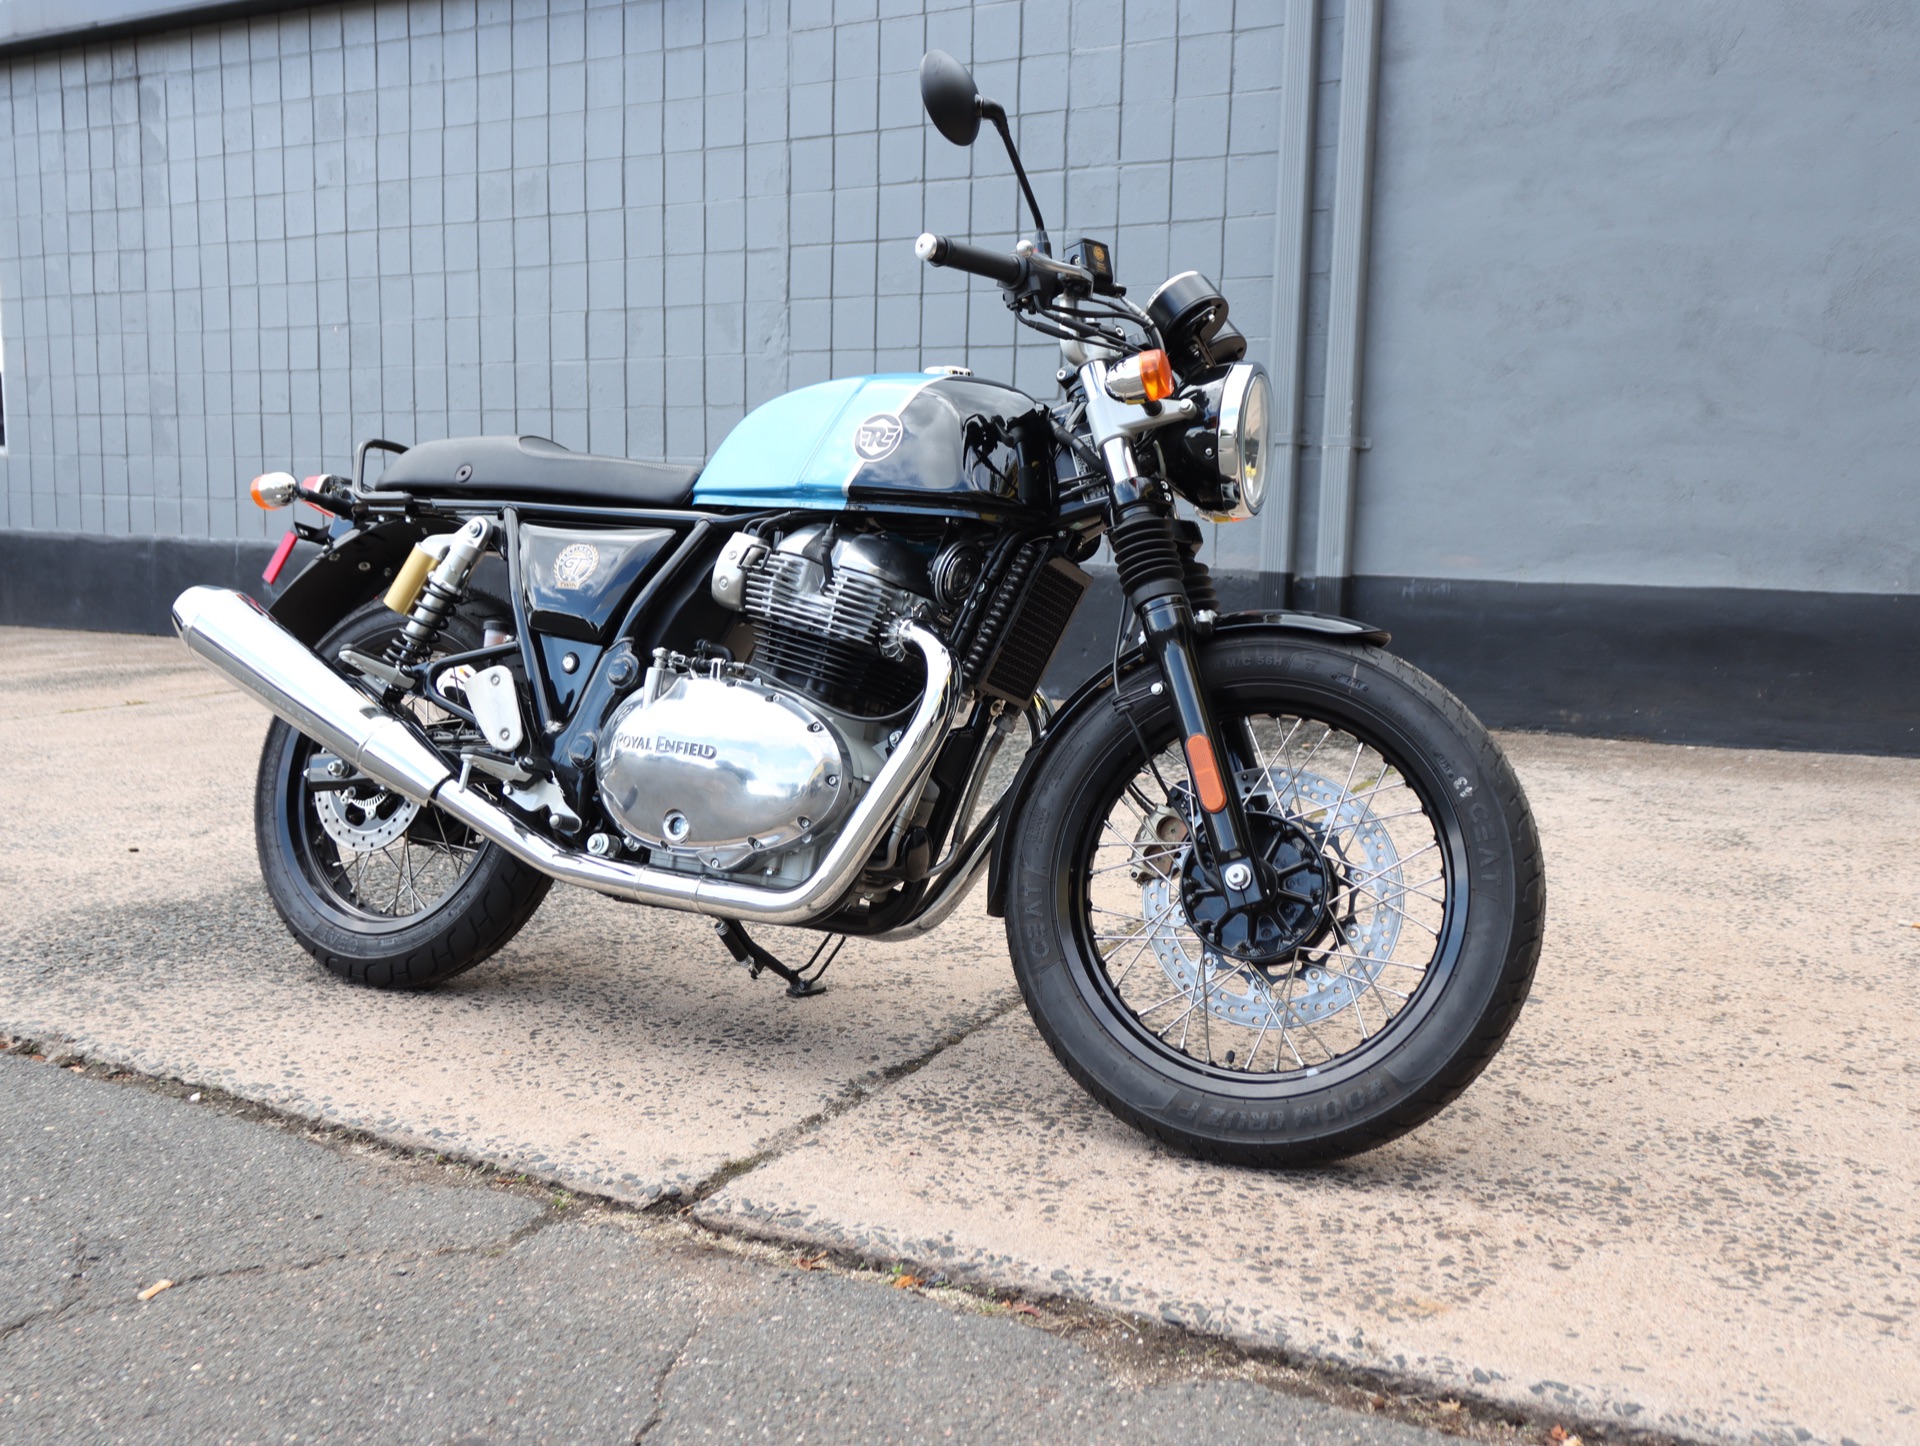 2022 Royal Enfield Continental GT 650 in Enfield, Connecticut - Photo 1